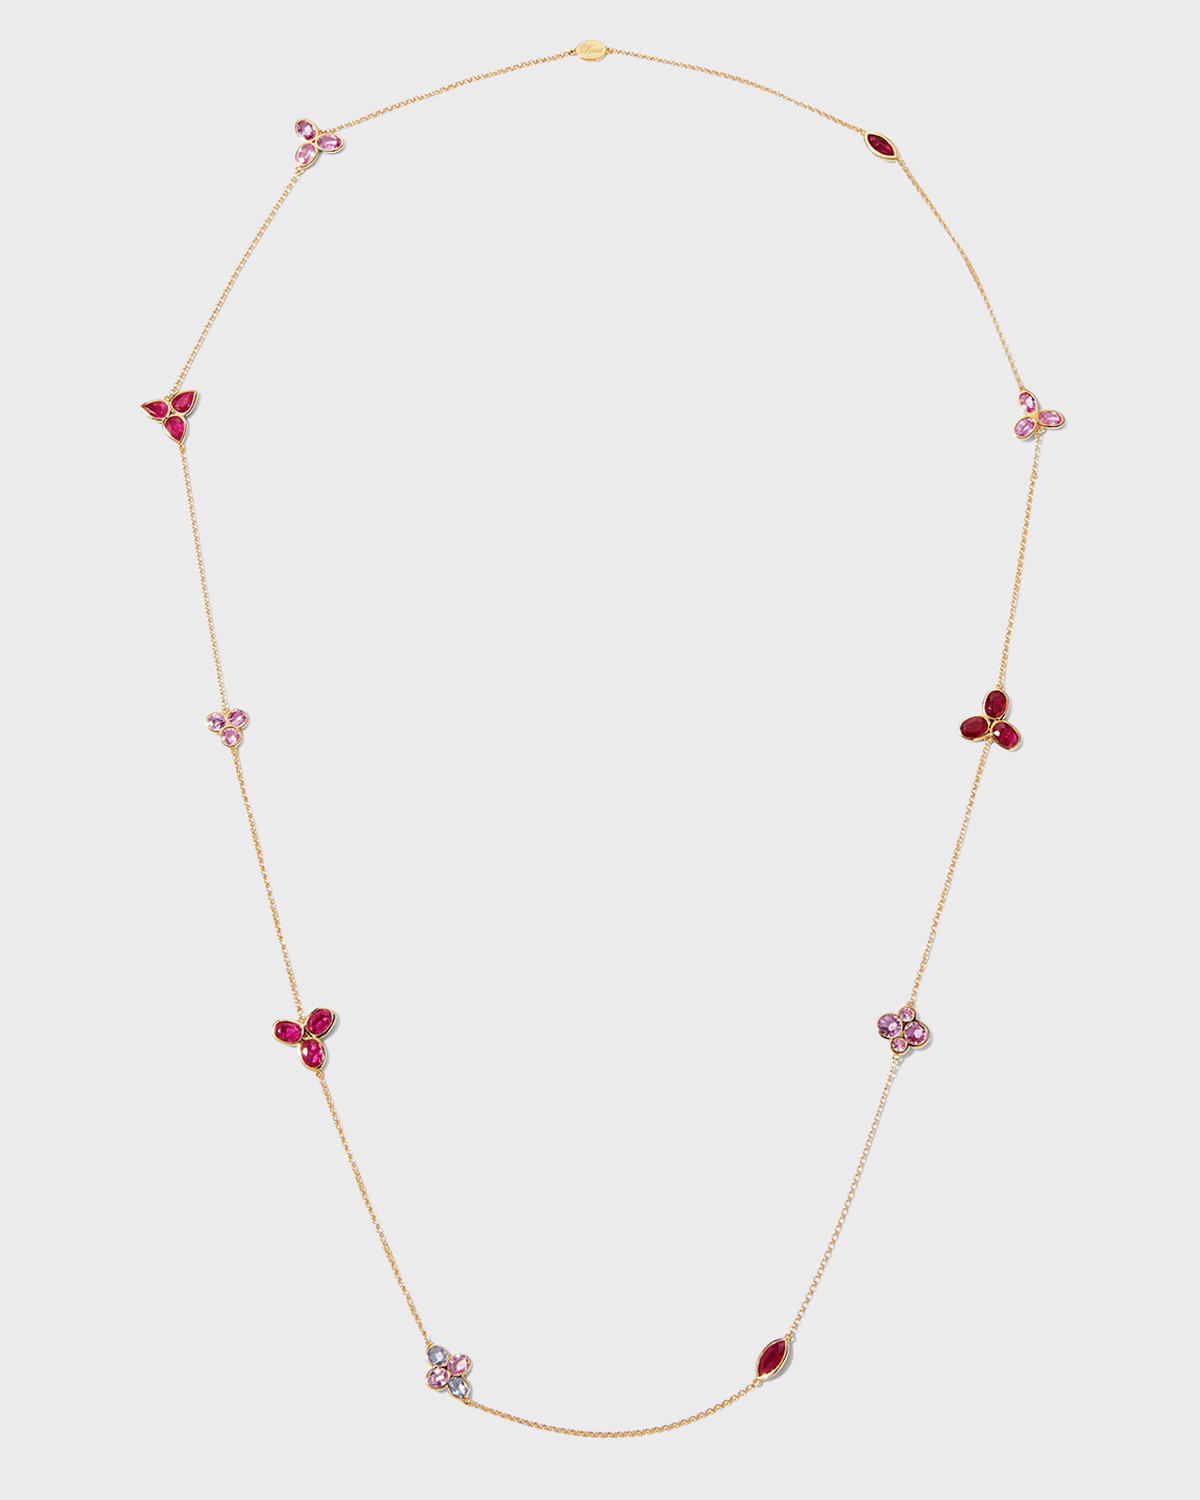 Alexander Laut Yellow Gold Sapphire, Ruby and Diamond Necklace